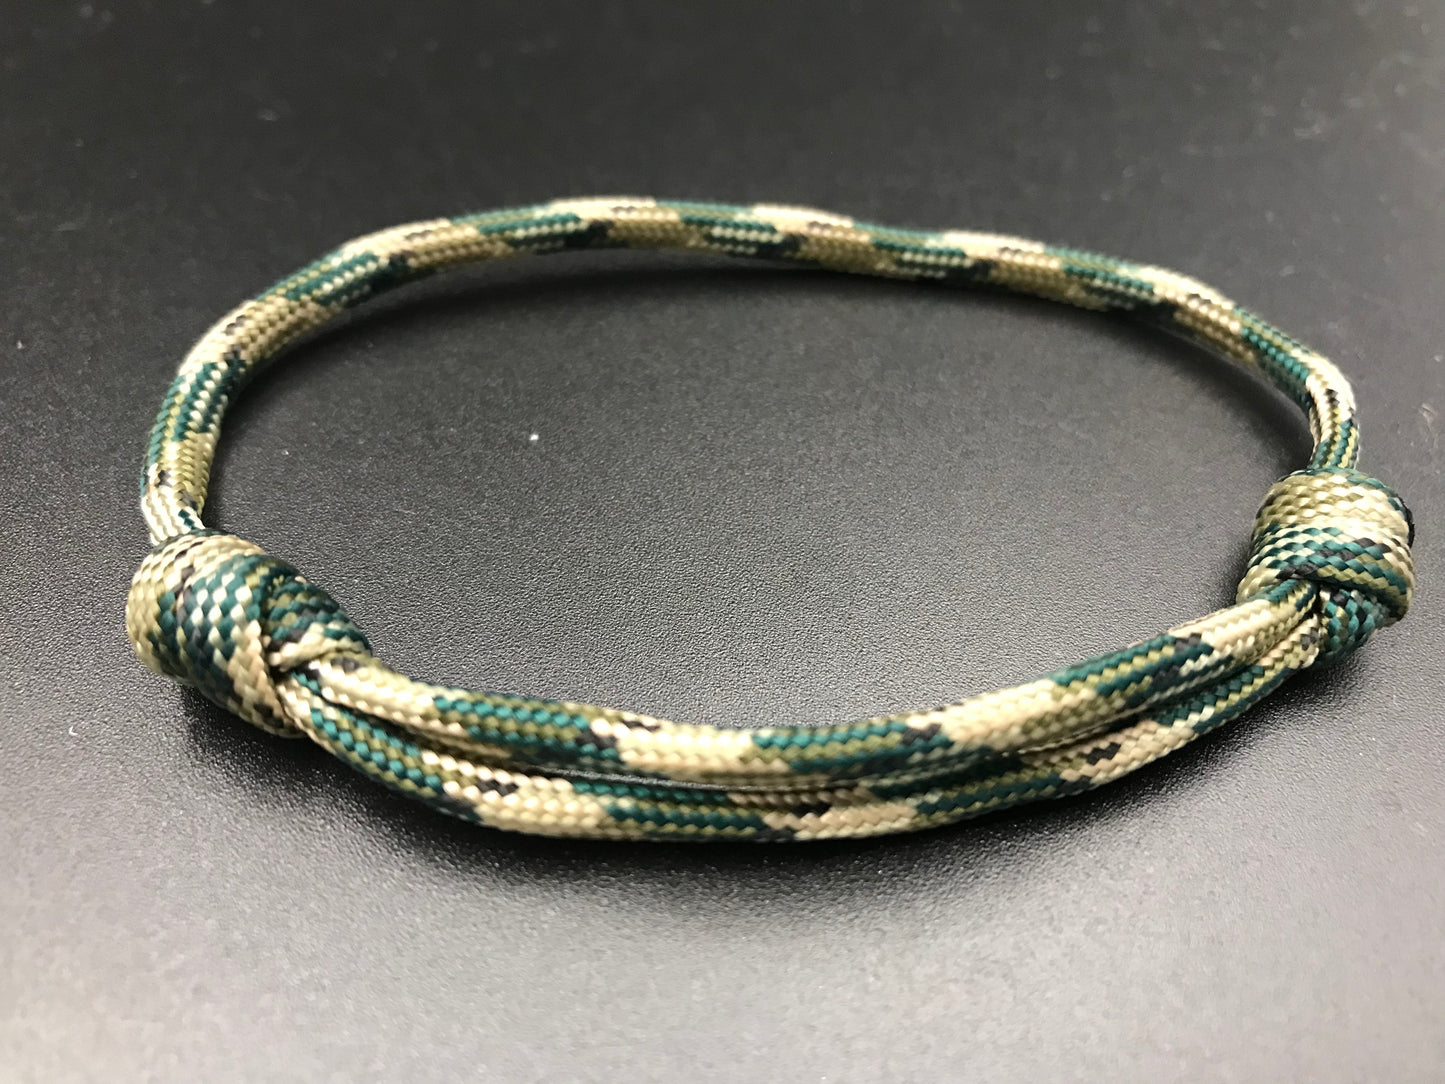 Paracord friendship bracelet In green sand camo ( green sand brown and beige ) light weight and fully adjustable